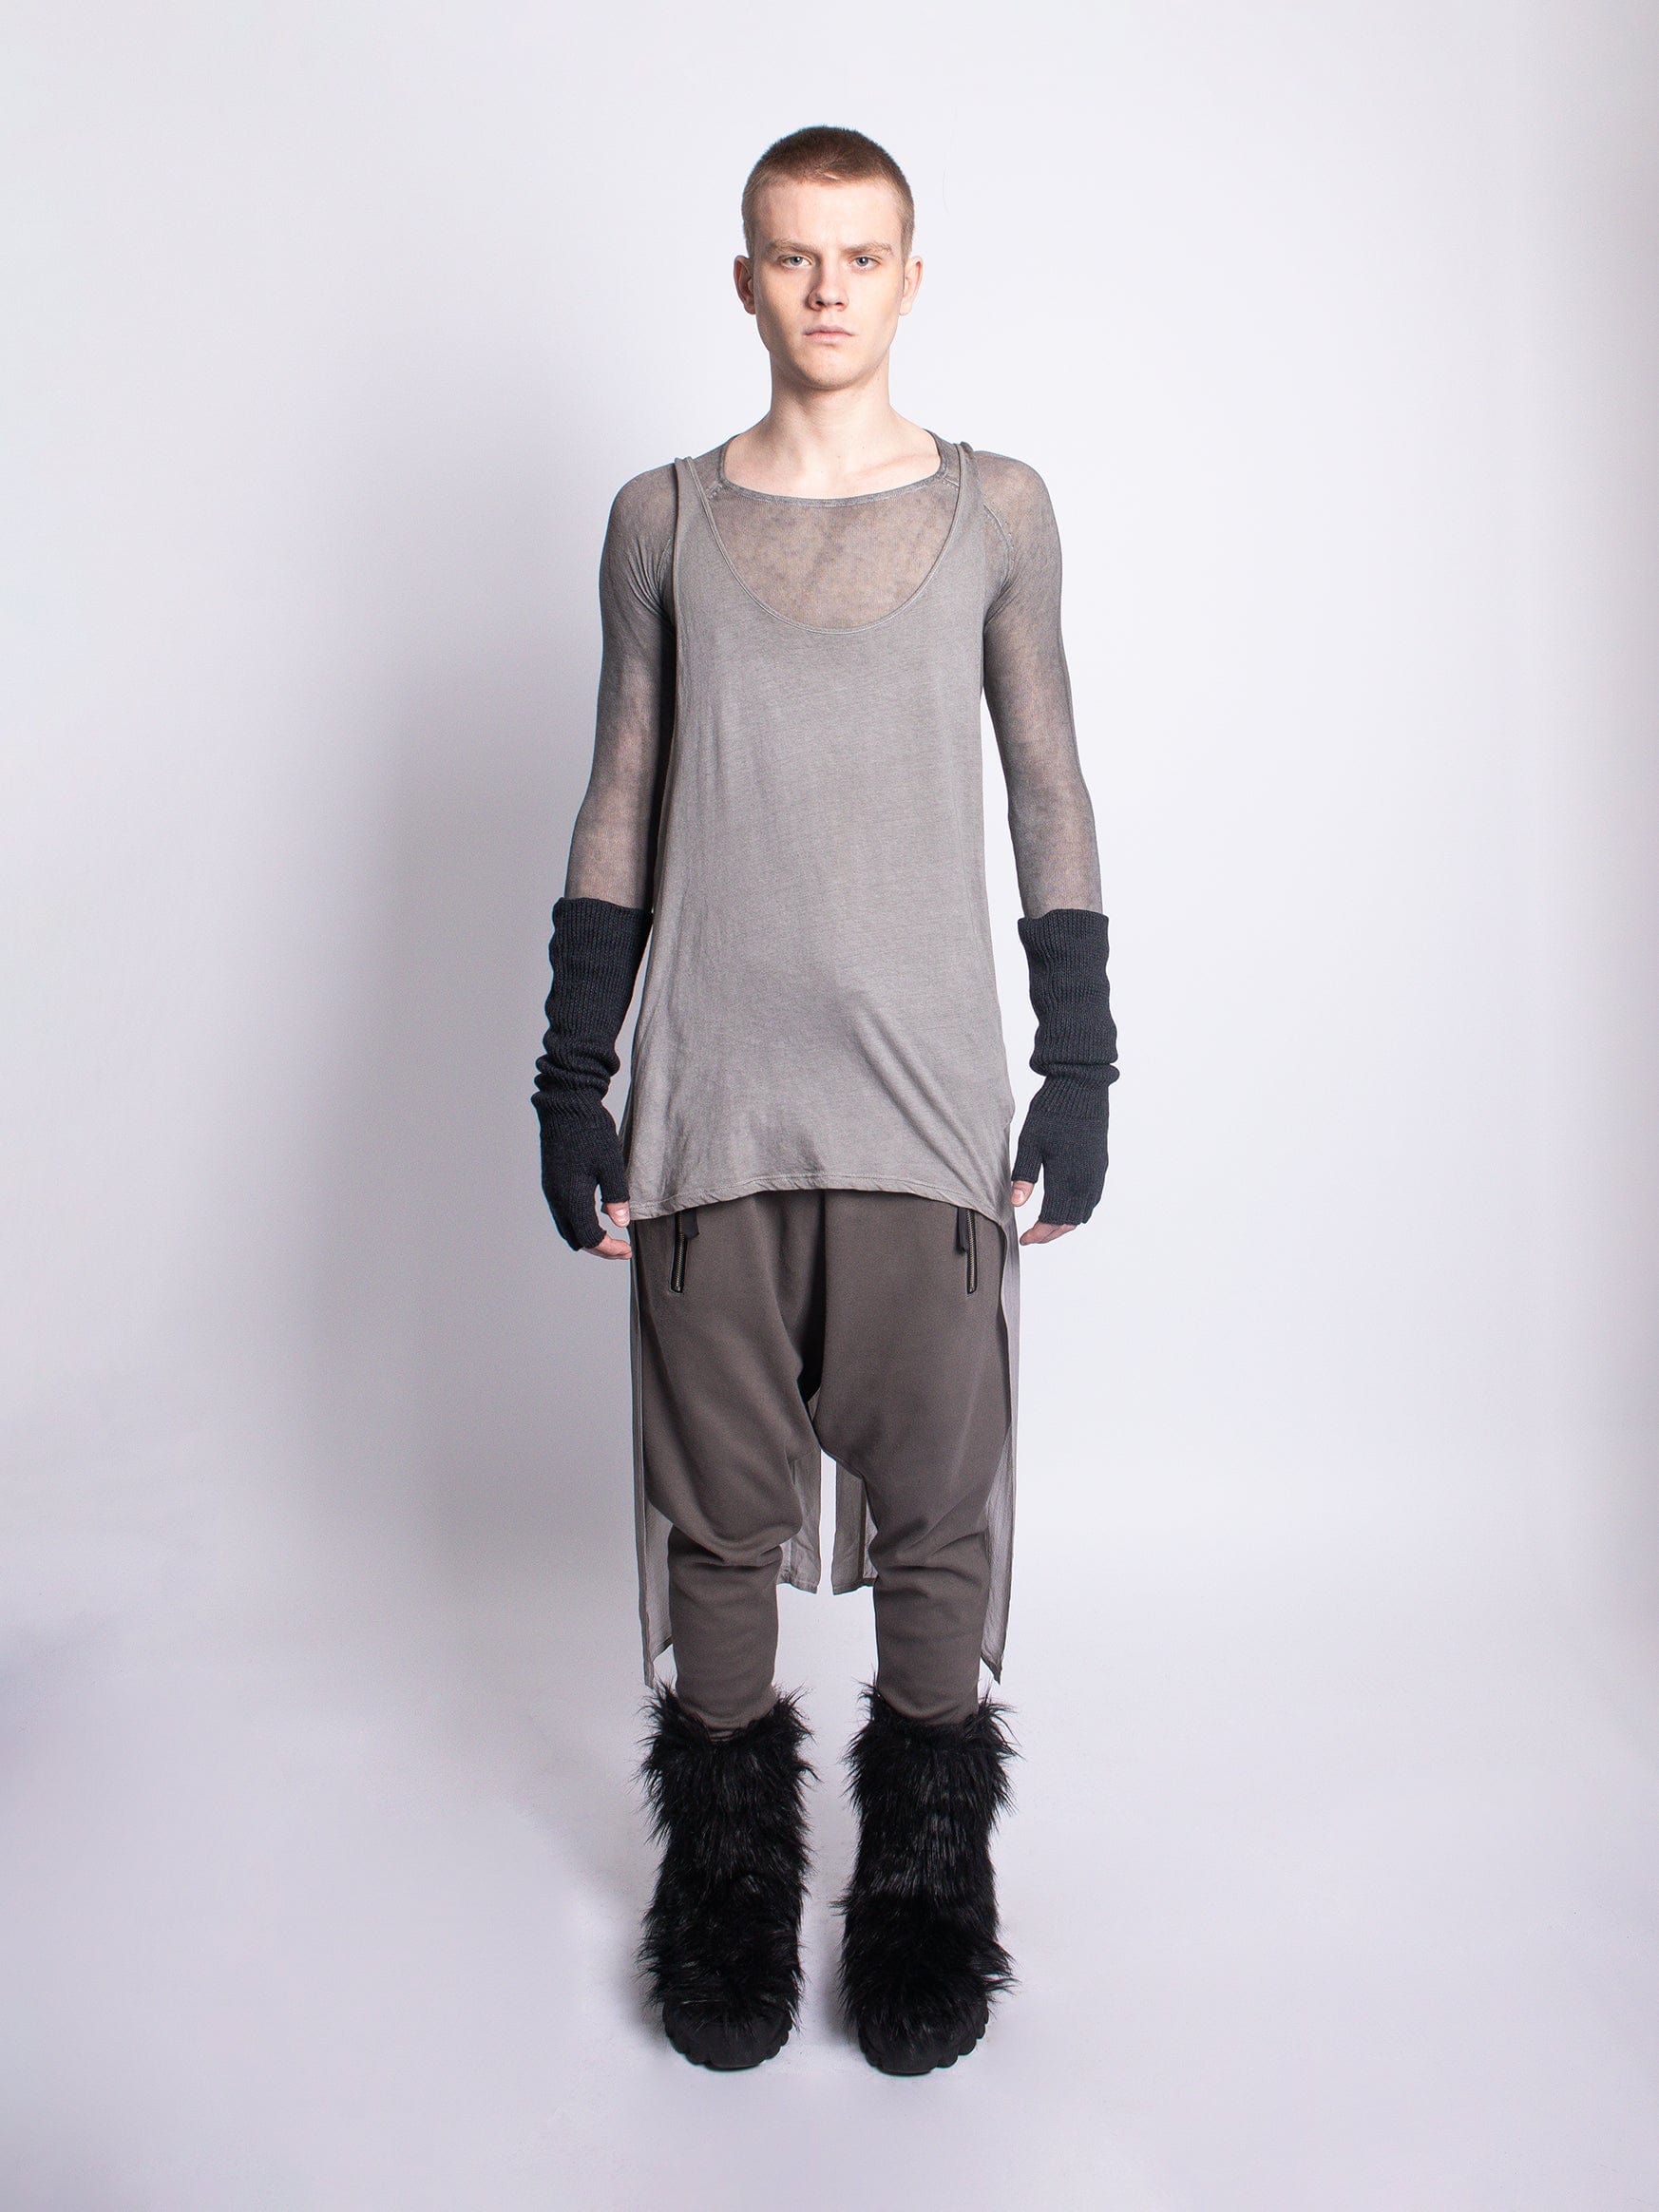 Stone Grey Vest with Tail Coat Draped Detailing